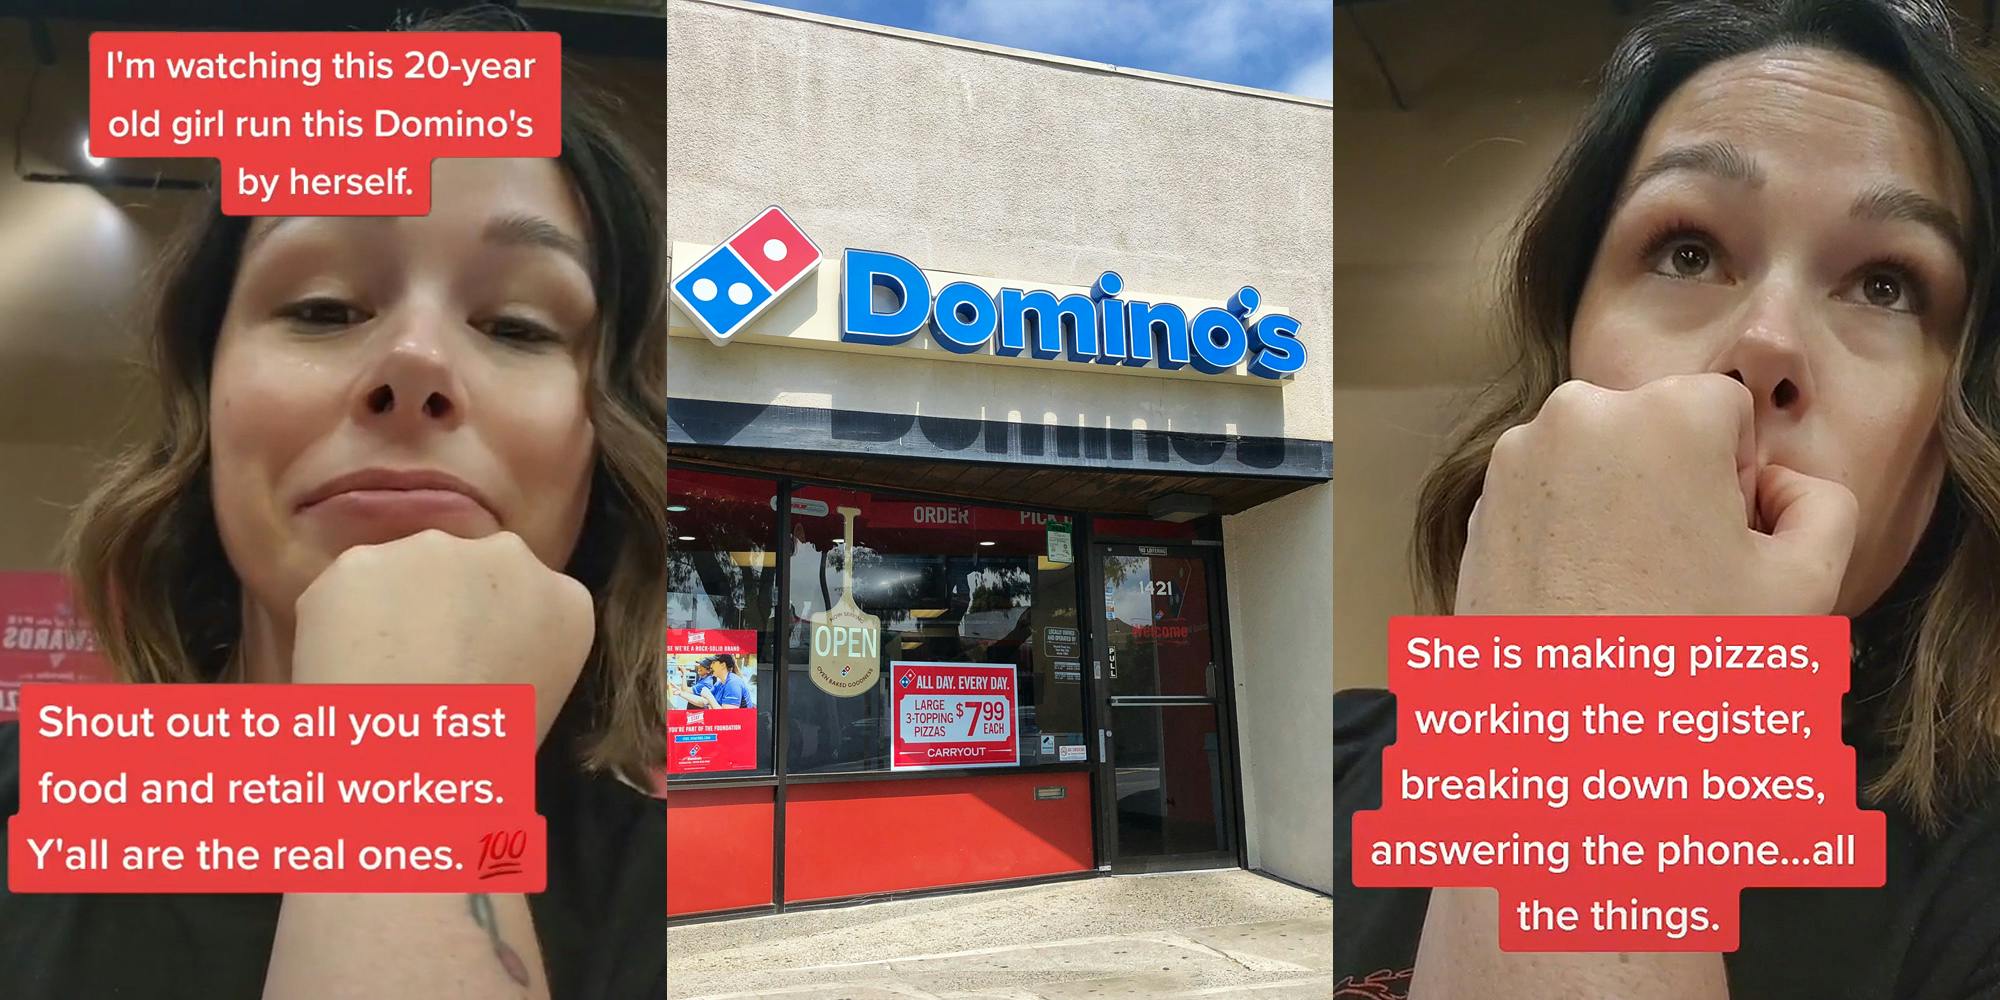 woman chin in hand caption "I'm watching this 20-year old girl run this Domino's by herself. Shout out to all you fast food and retail workers. Y'all are the real ones" (l) Domino's building with sign outside (c) woman hand over mouth caption "She is making pizzas, working the register, breaking down boxes, answering the phone... all the things." (r)